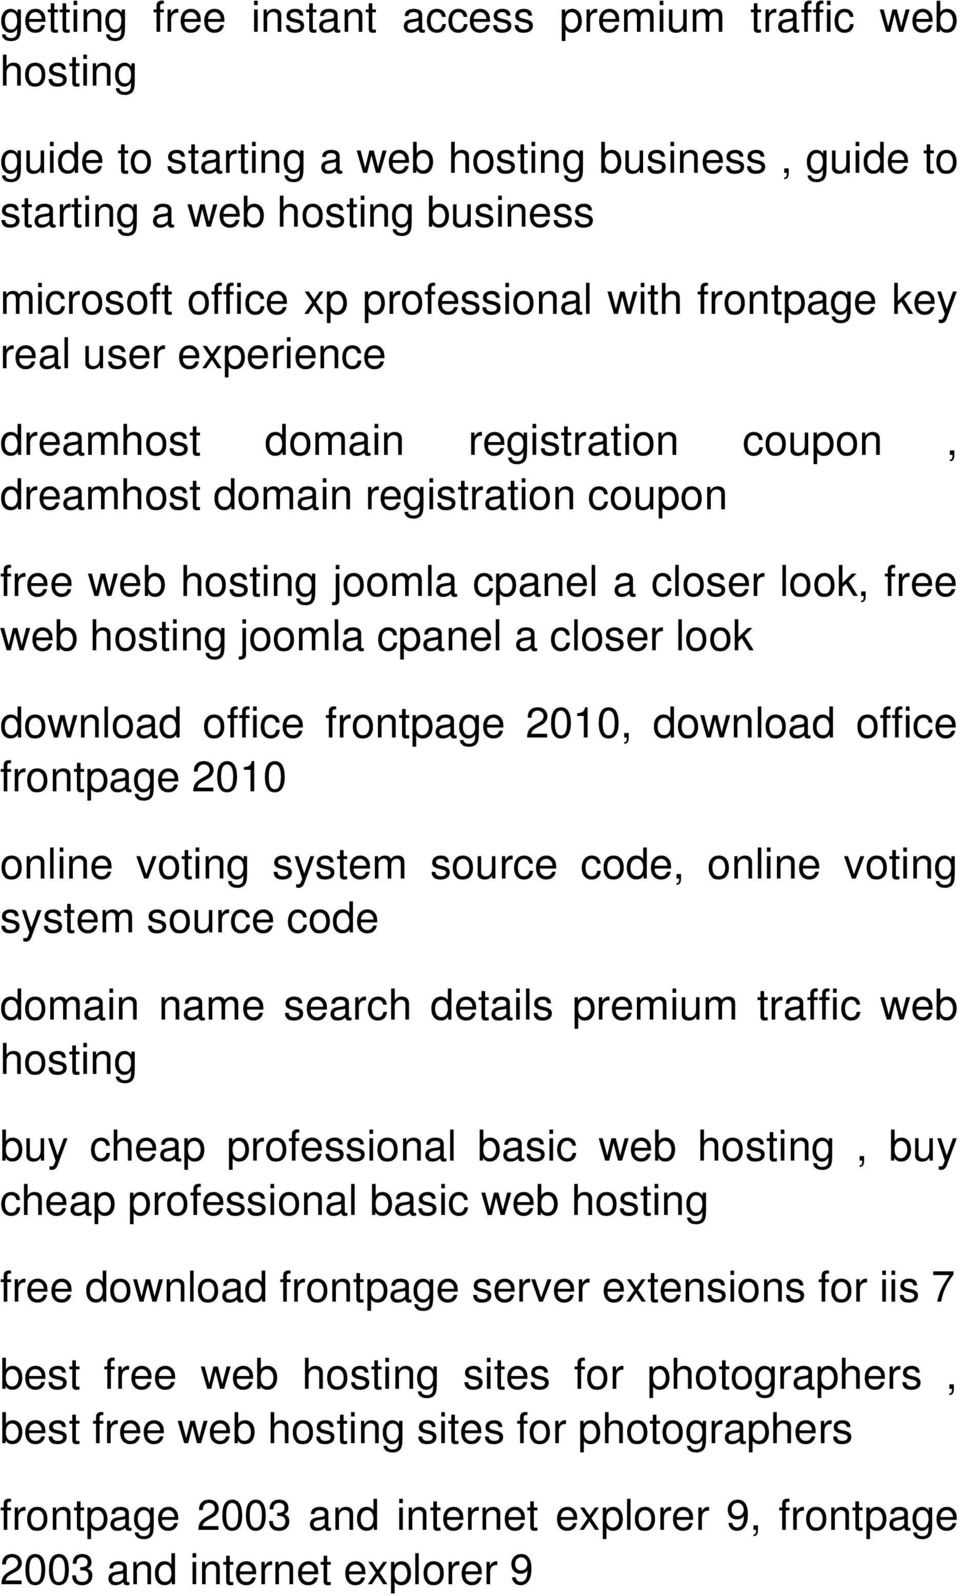 frontpage 2010, download office frontpage 2010 online voting system source code, online voting system source code domain name search details premium traffic web hosting buy cheap professional basic